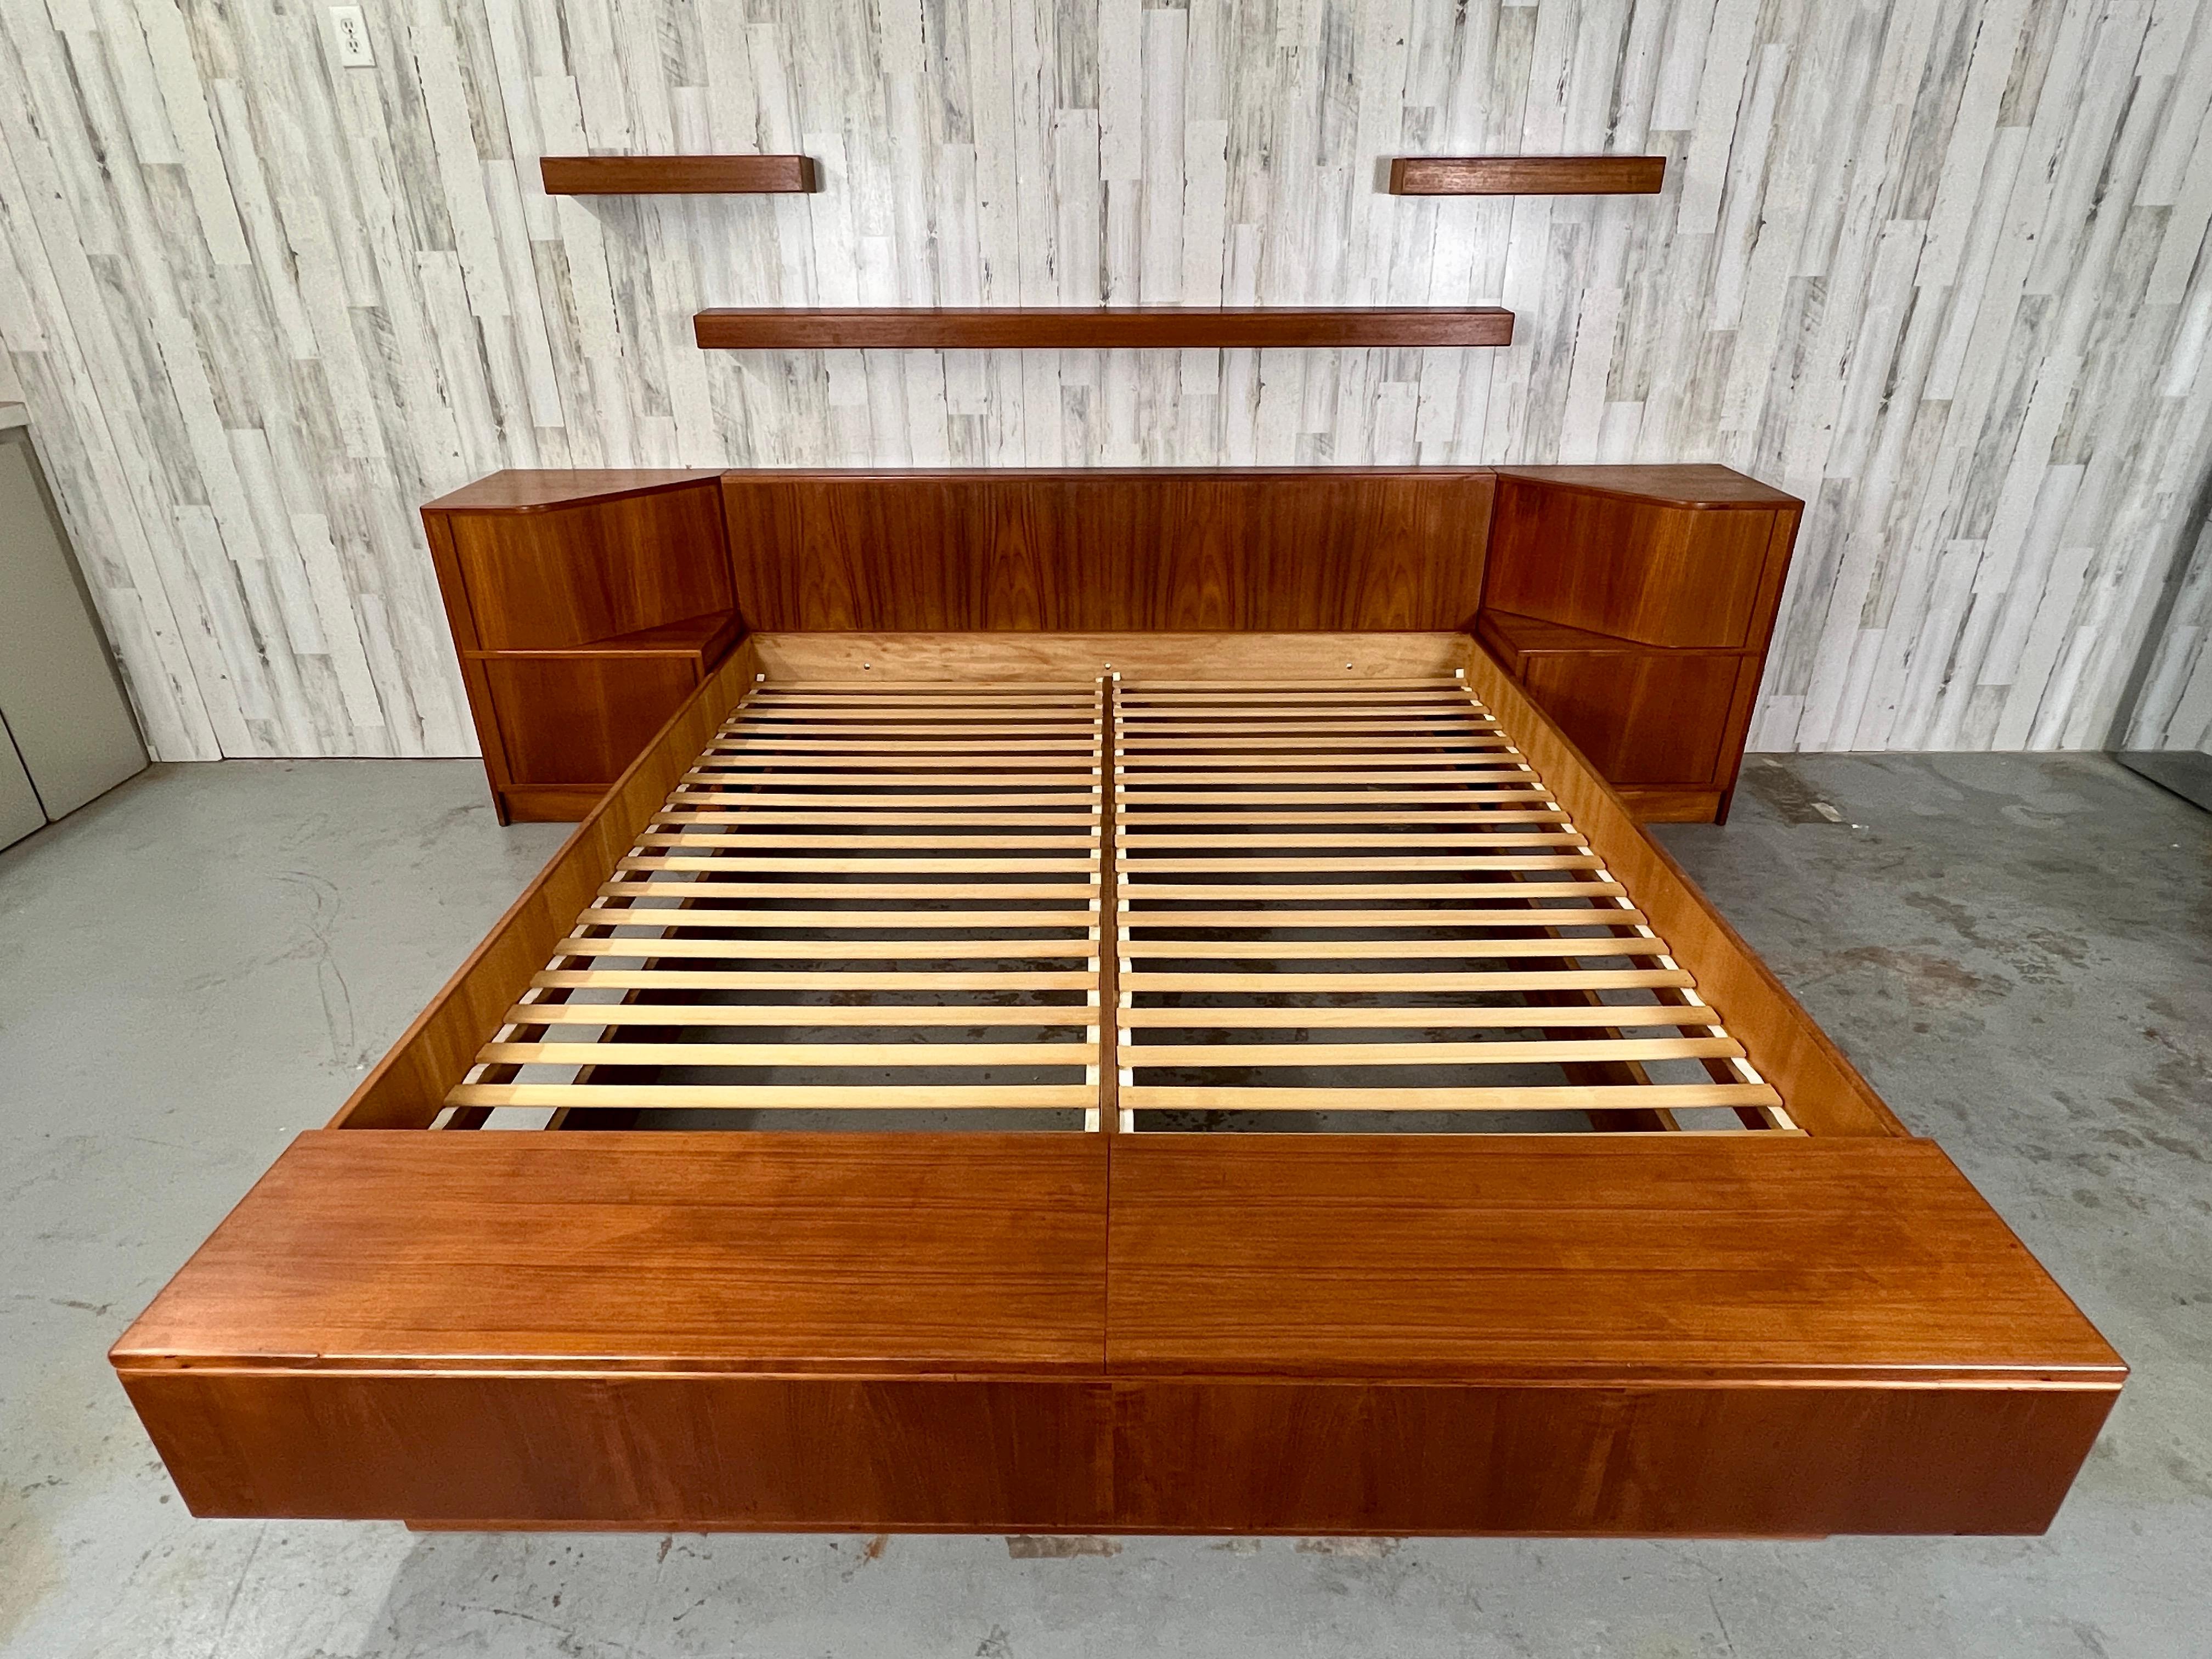 Poul Hundevad teak platform bed with tambour door nightstands & floating shelves. This is a huge statement bedroom piece with all the bells and whistles. Huge tambour door nightstands that can fit tons of items. Front storage trunk for more